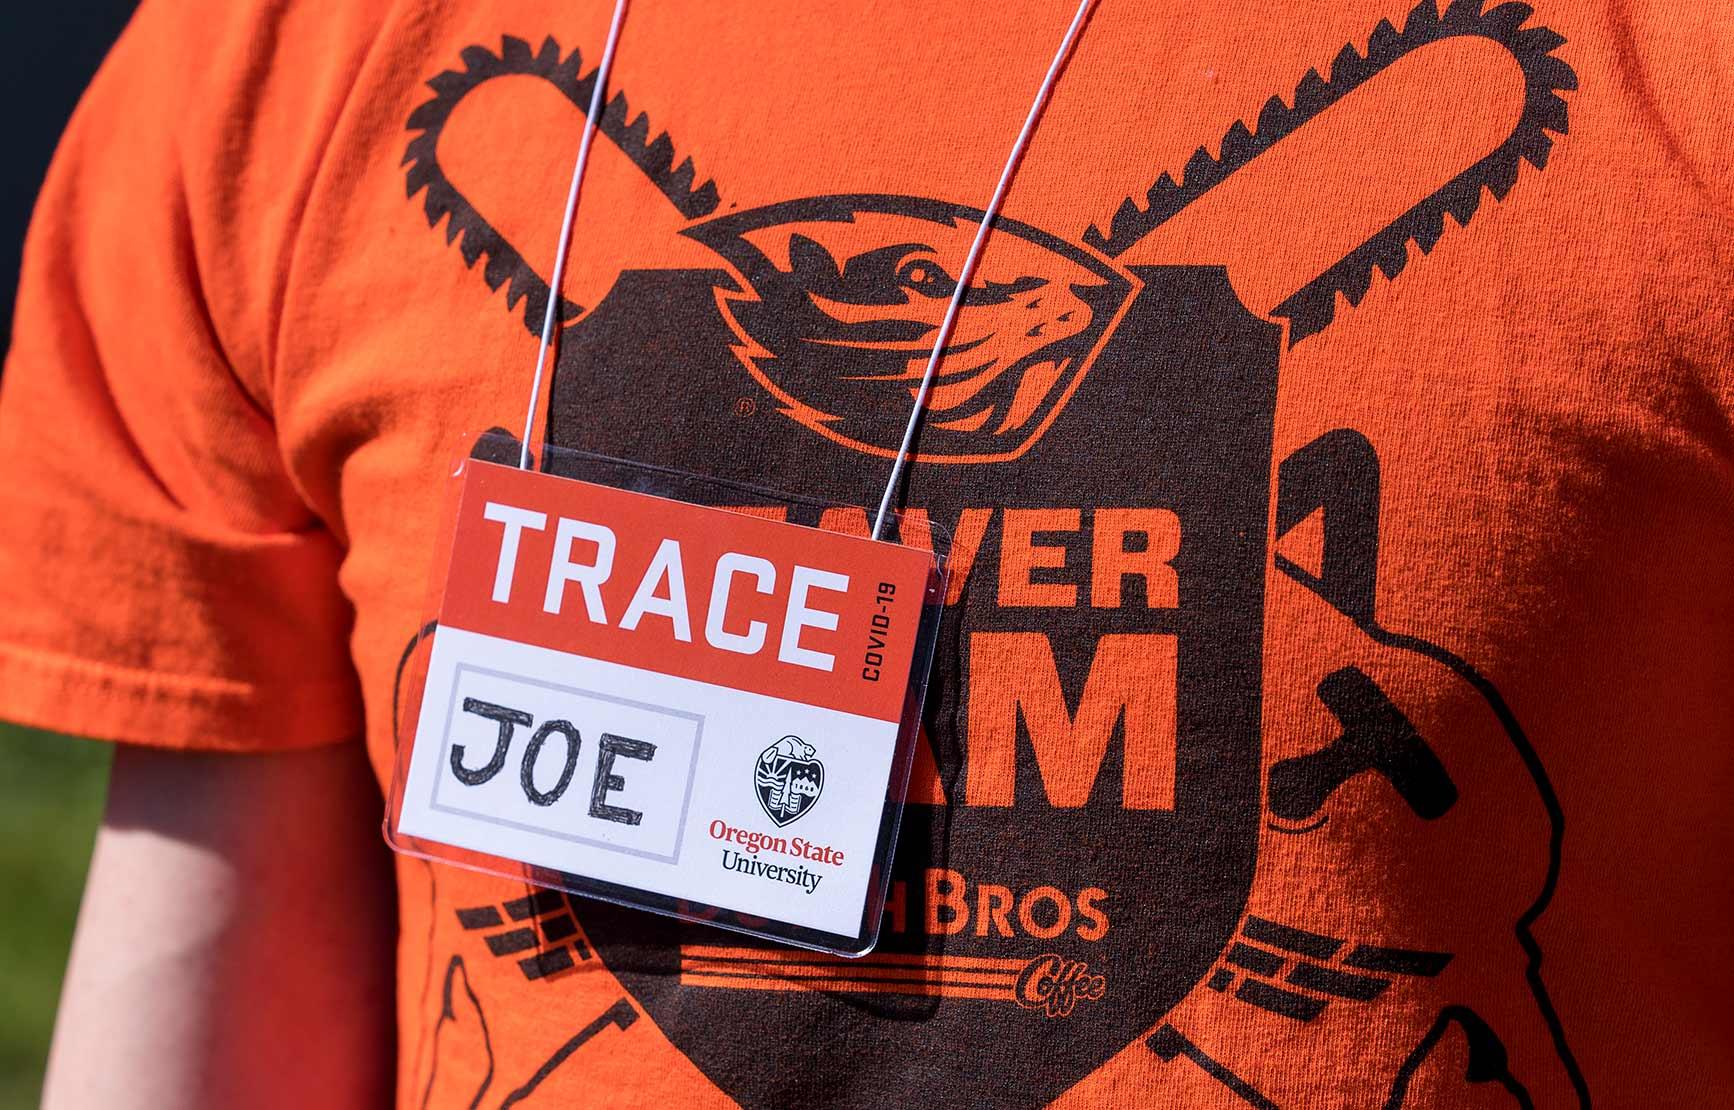 Person named Joe wearing a TRACE name tag